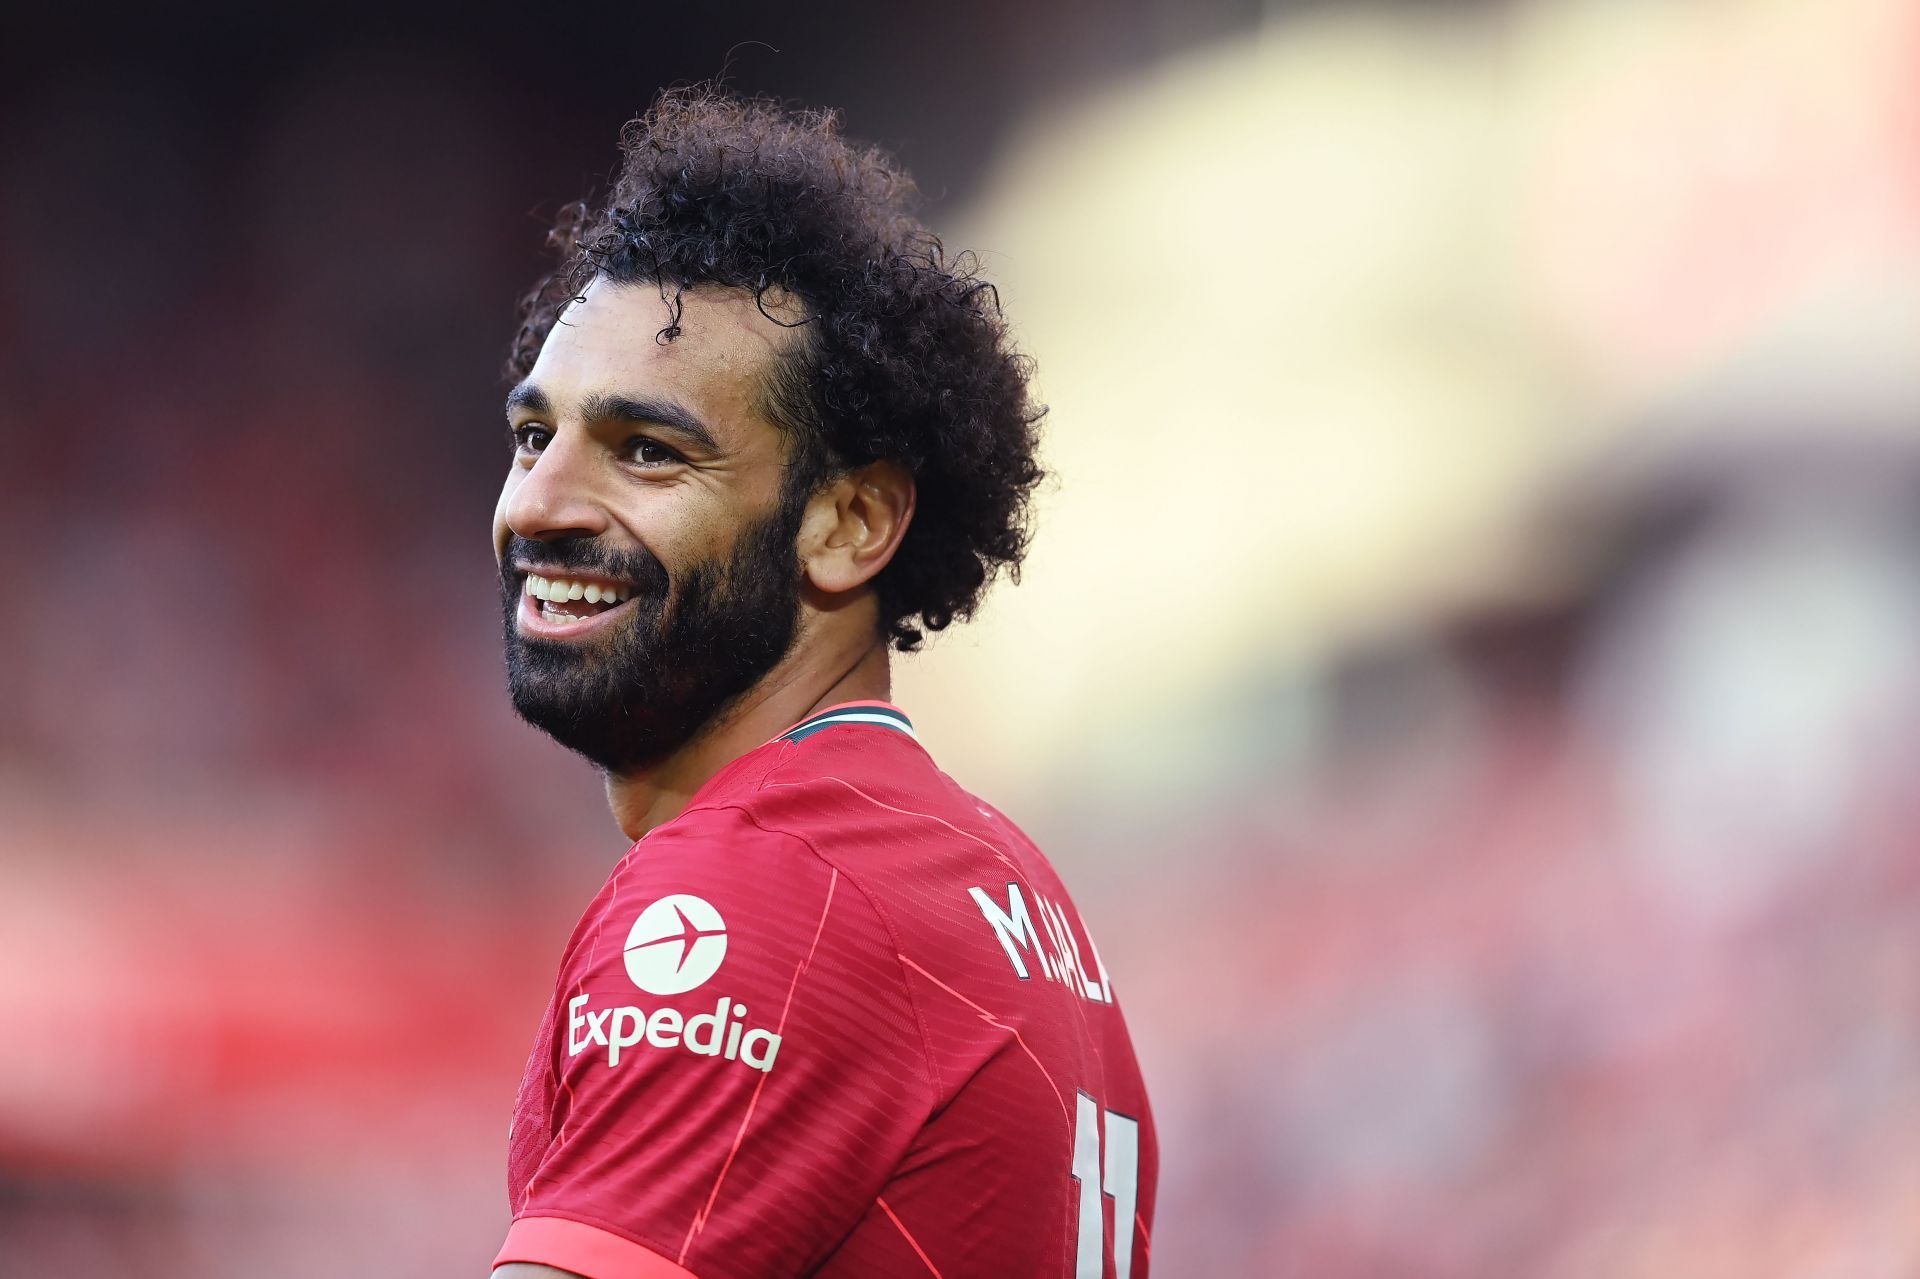 Mo Salah in the Liverpool v Chelsea Premier League match